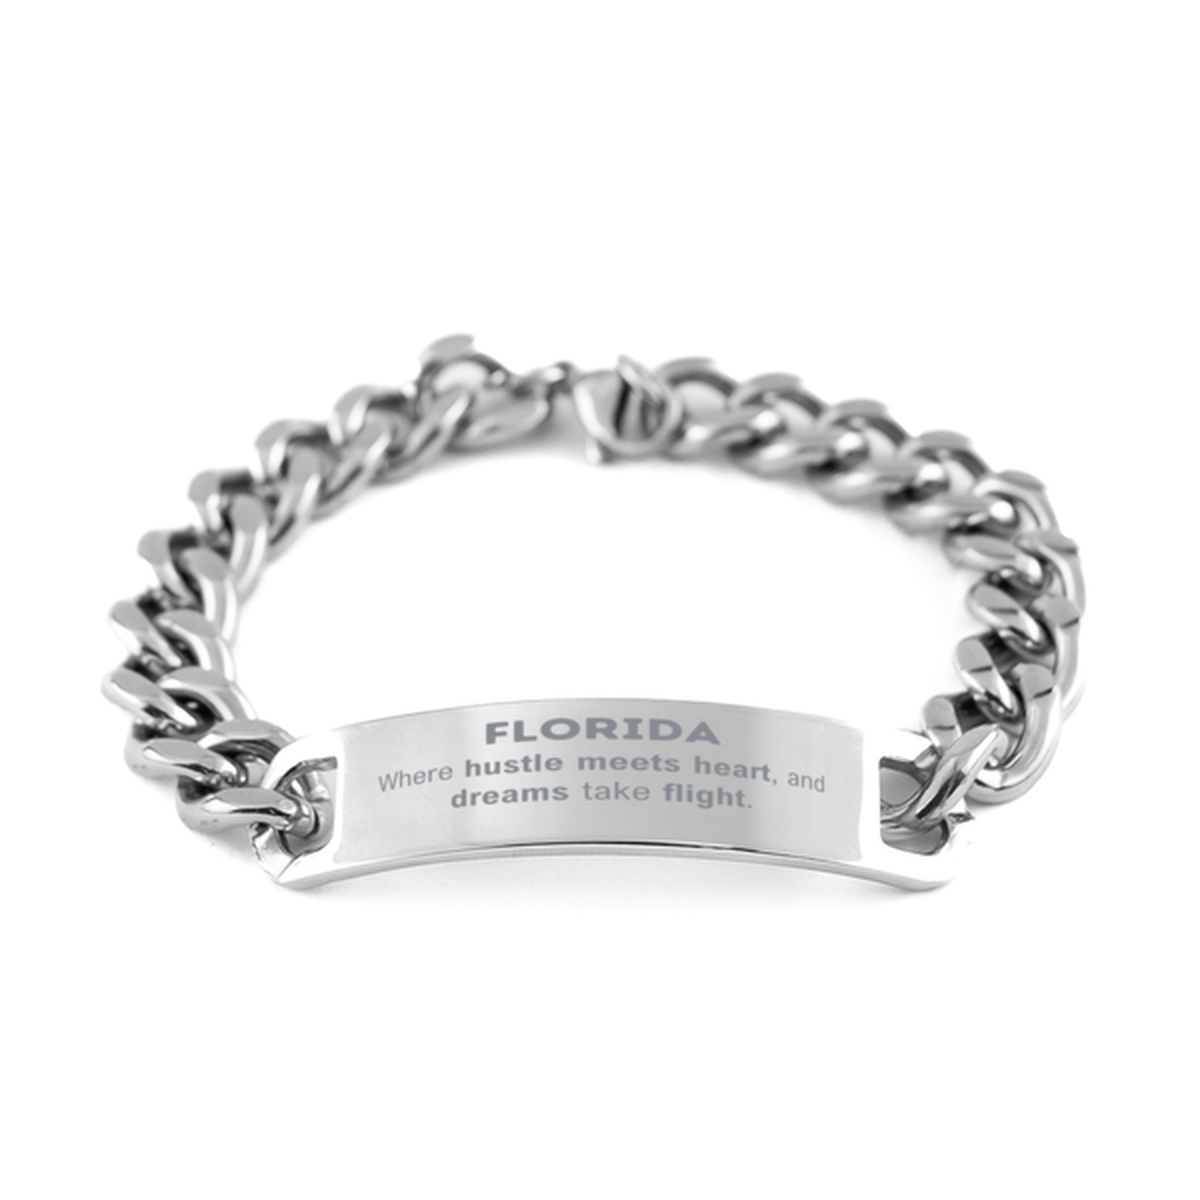 Florida: Where hustle meets heart, and dreams take flight, Florida Gifts, Proud Florida Christmas Birthday Florida Cuban Chain Stainless Steel Bracelet, Florida State People, Men, Women, Friends